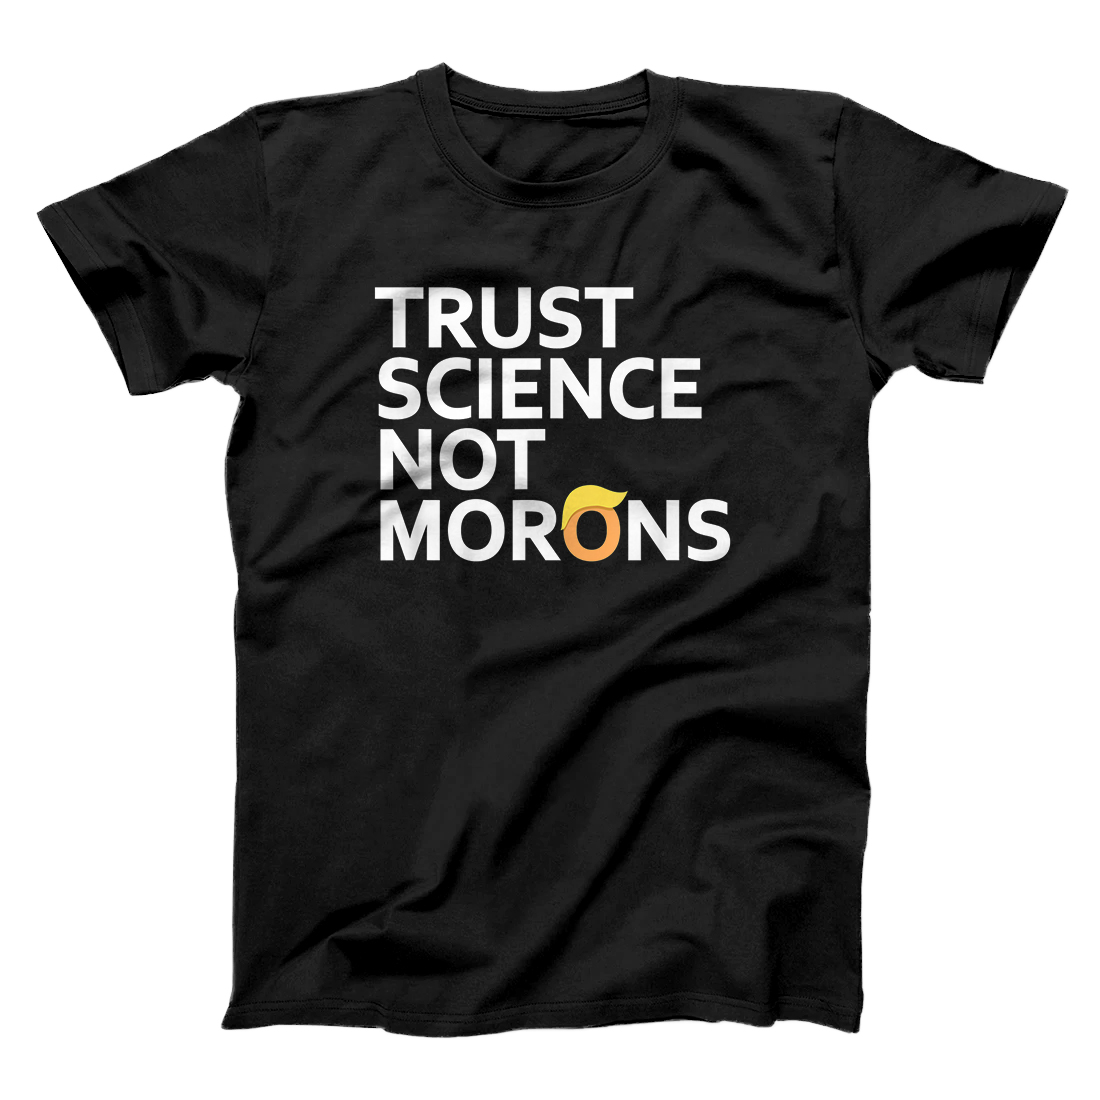 Personalized Trust Science Not Morons T Shirt Anti-Trump Team Fauci 2020 T-Shirt